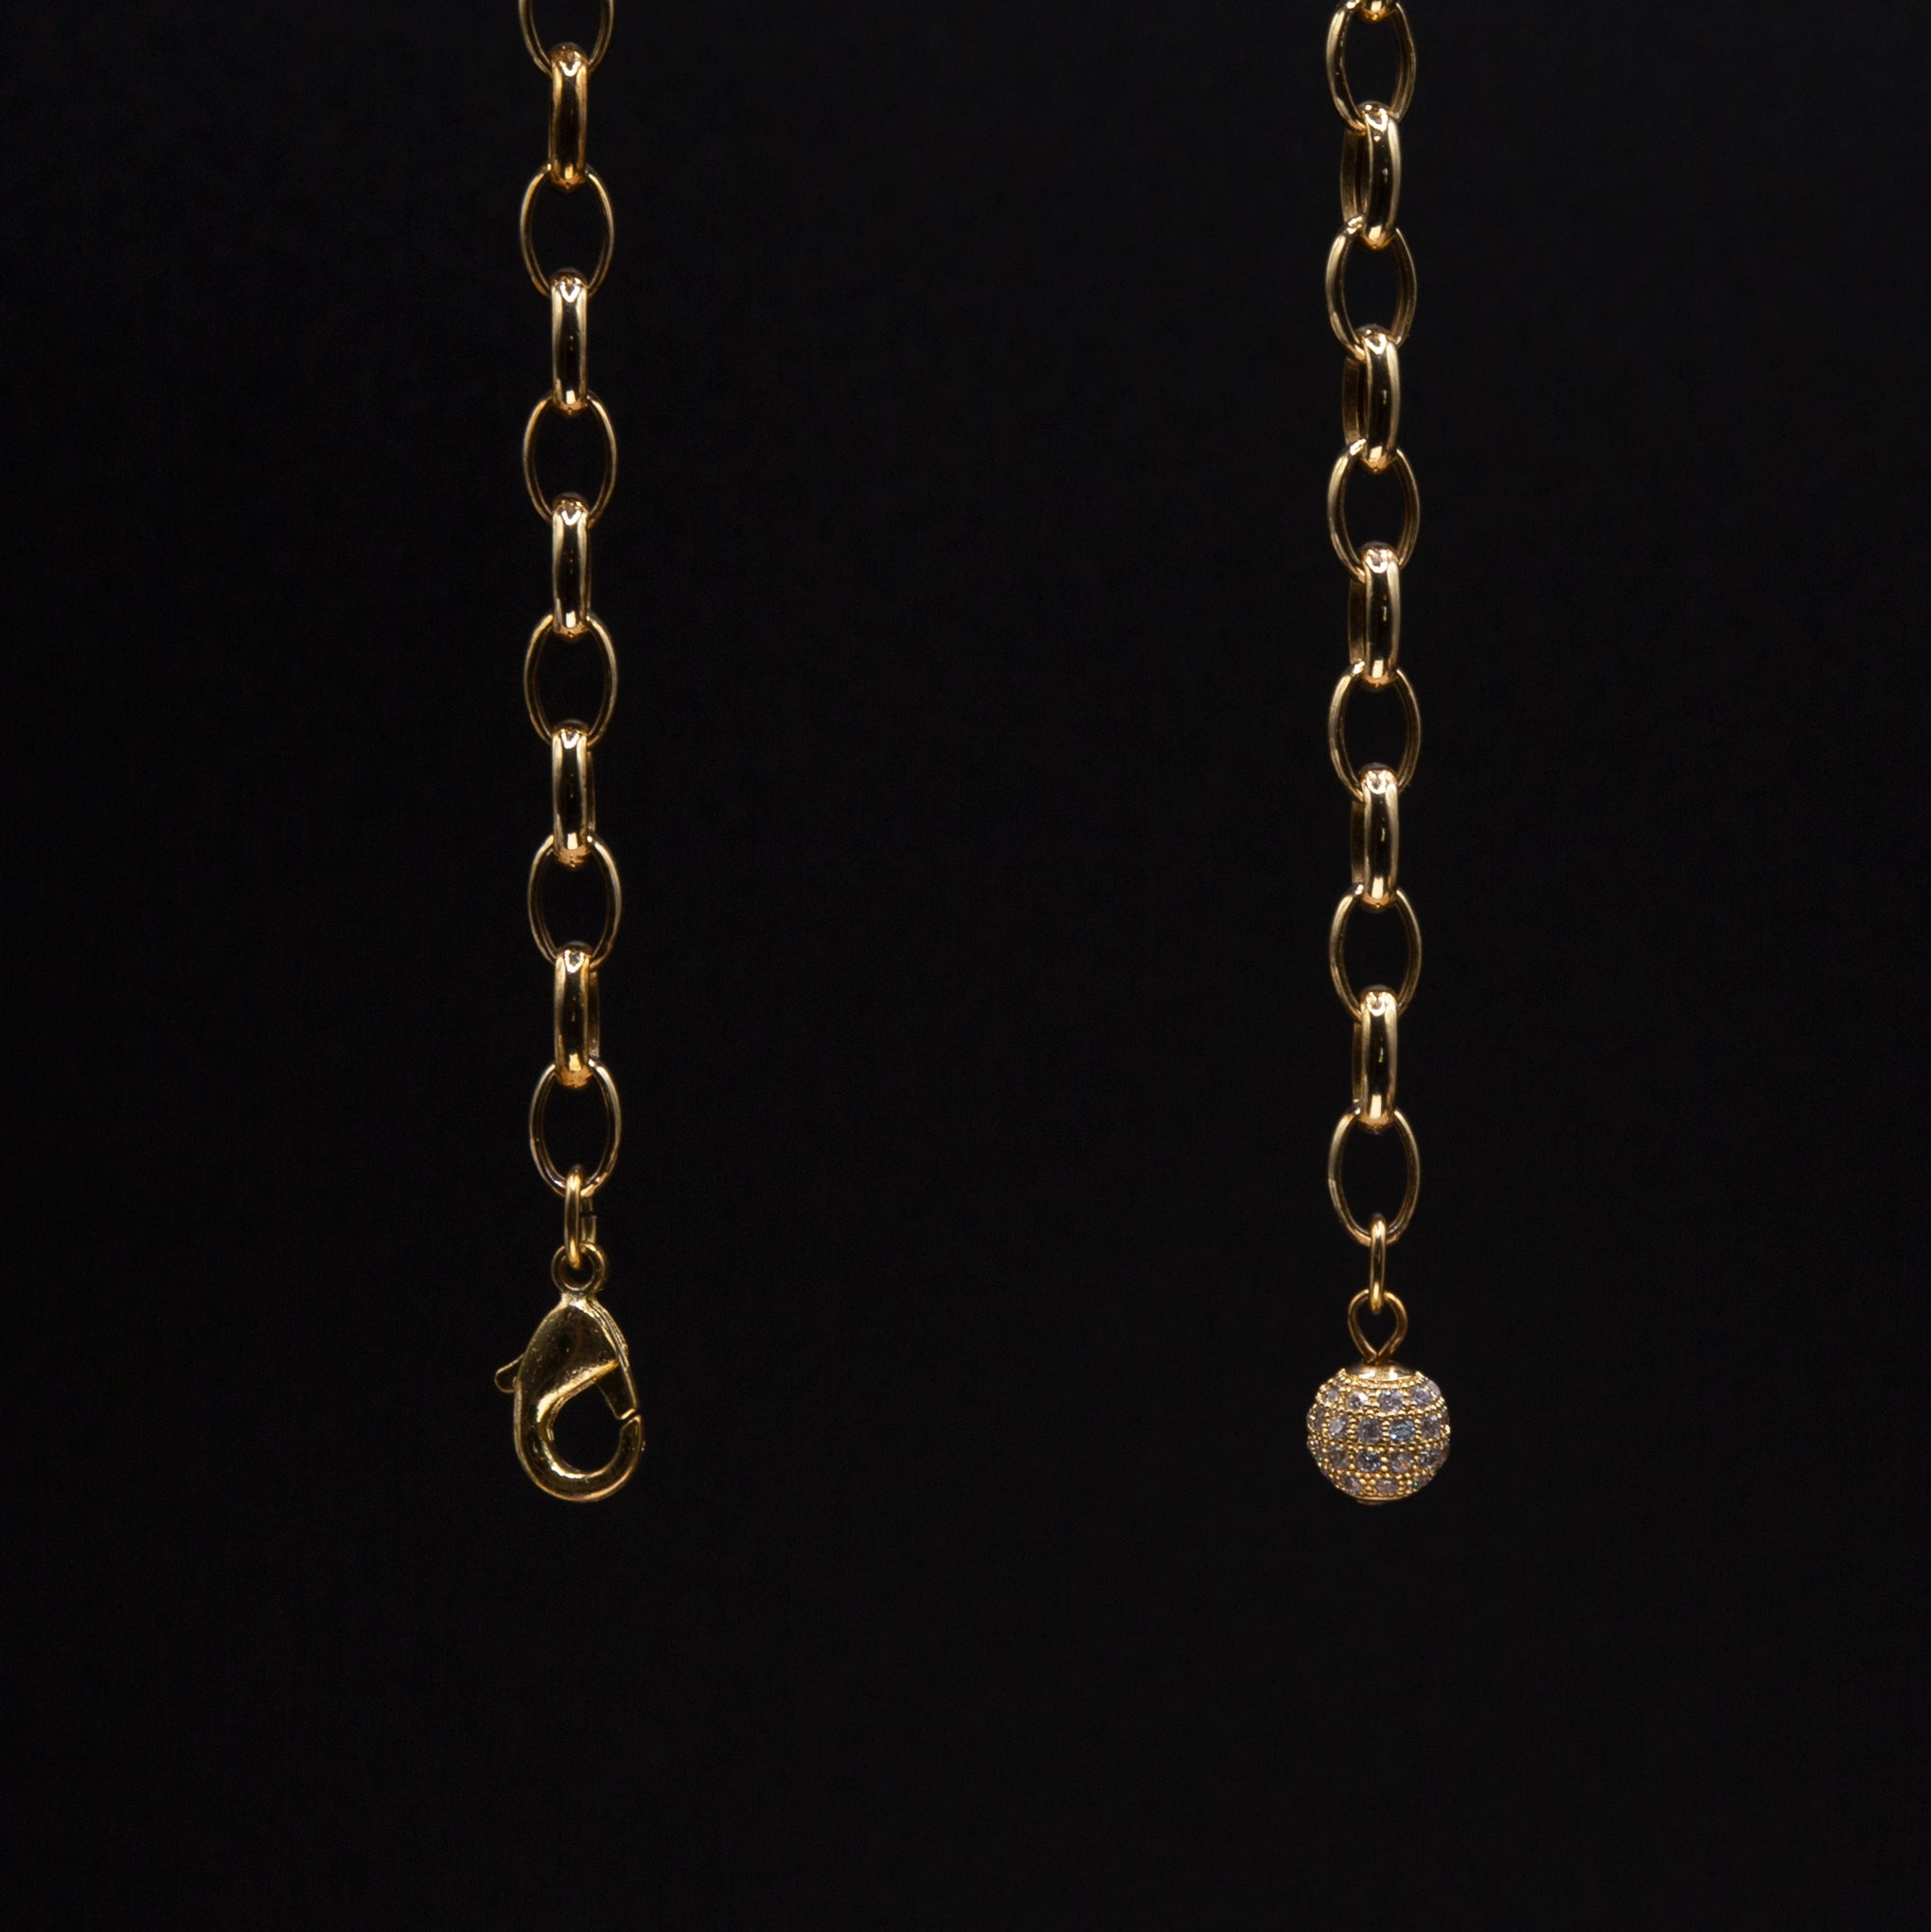 Gilded Chain Necklace with Drop